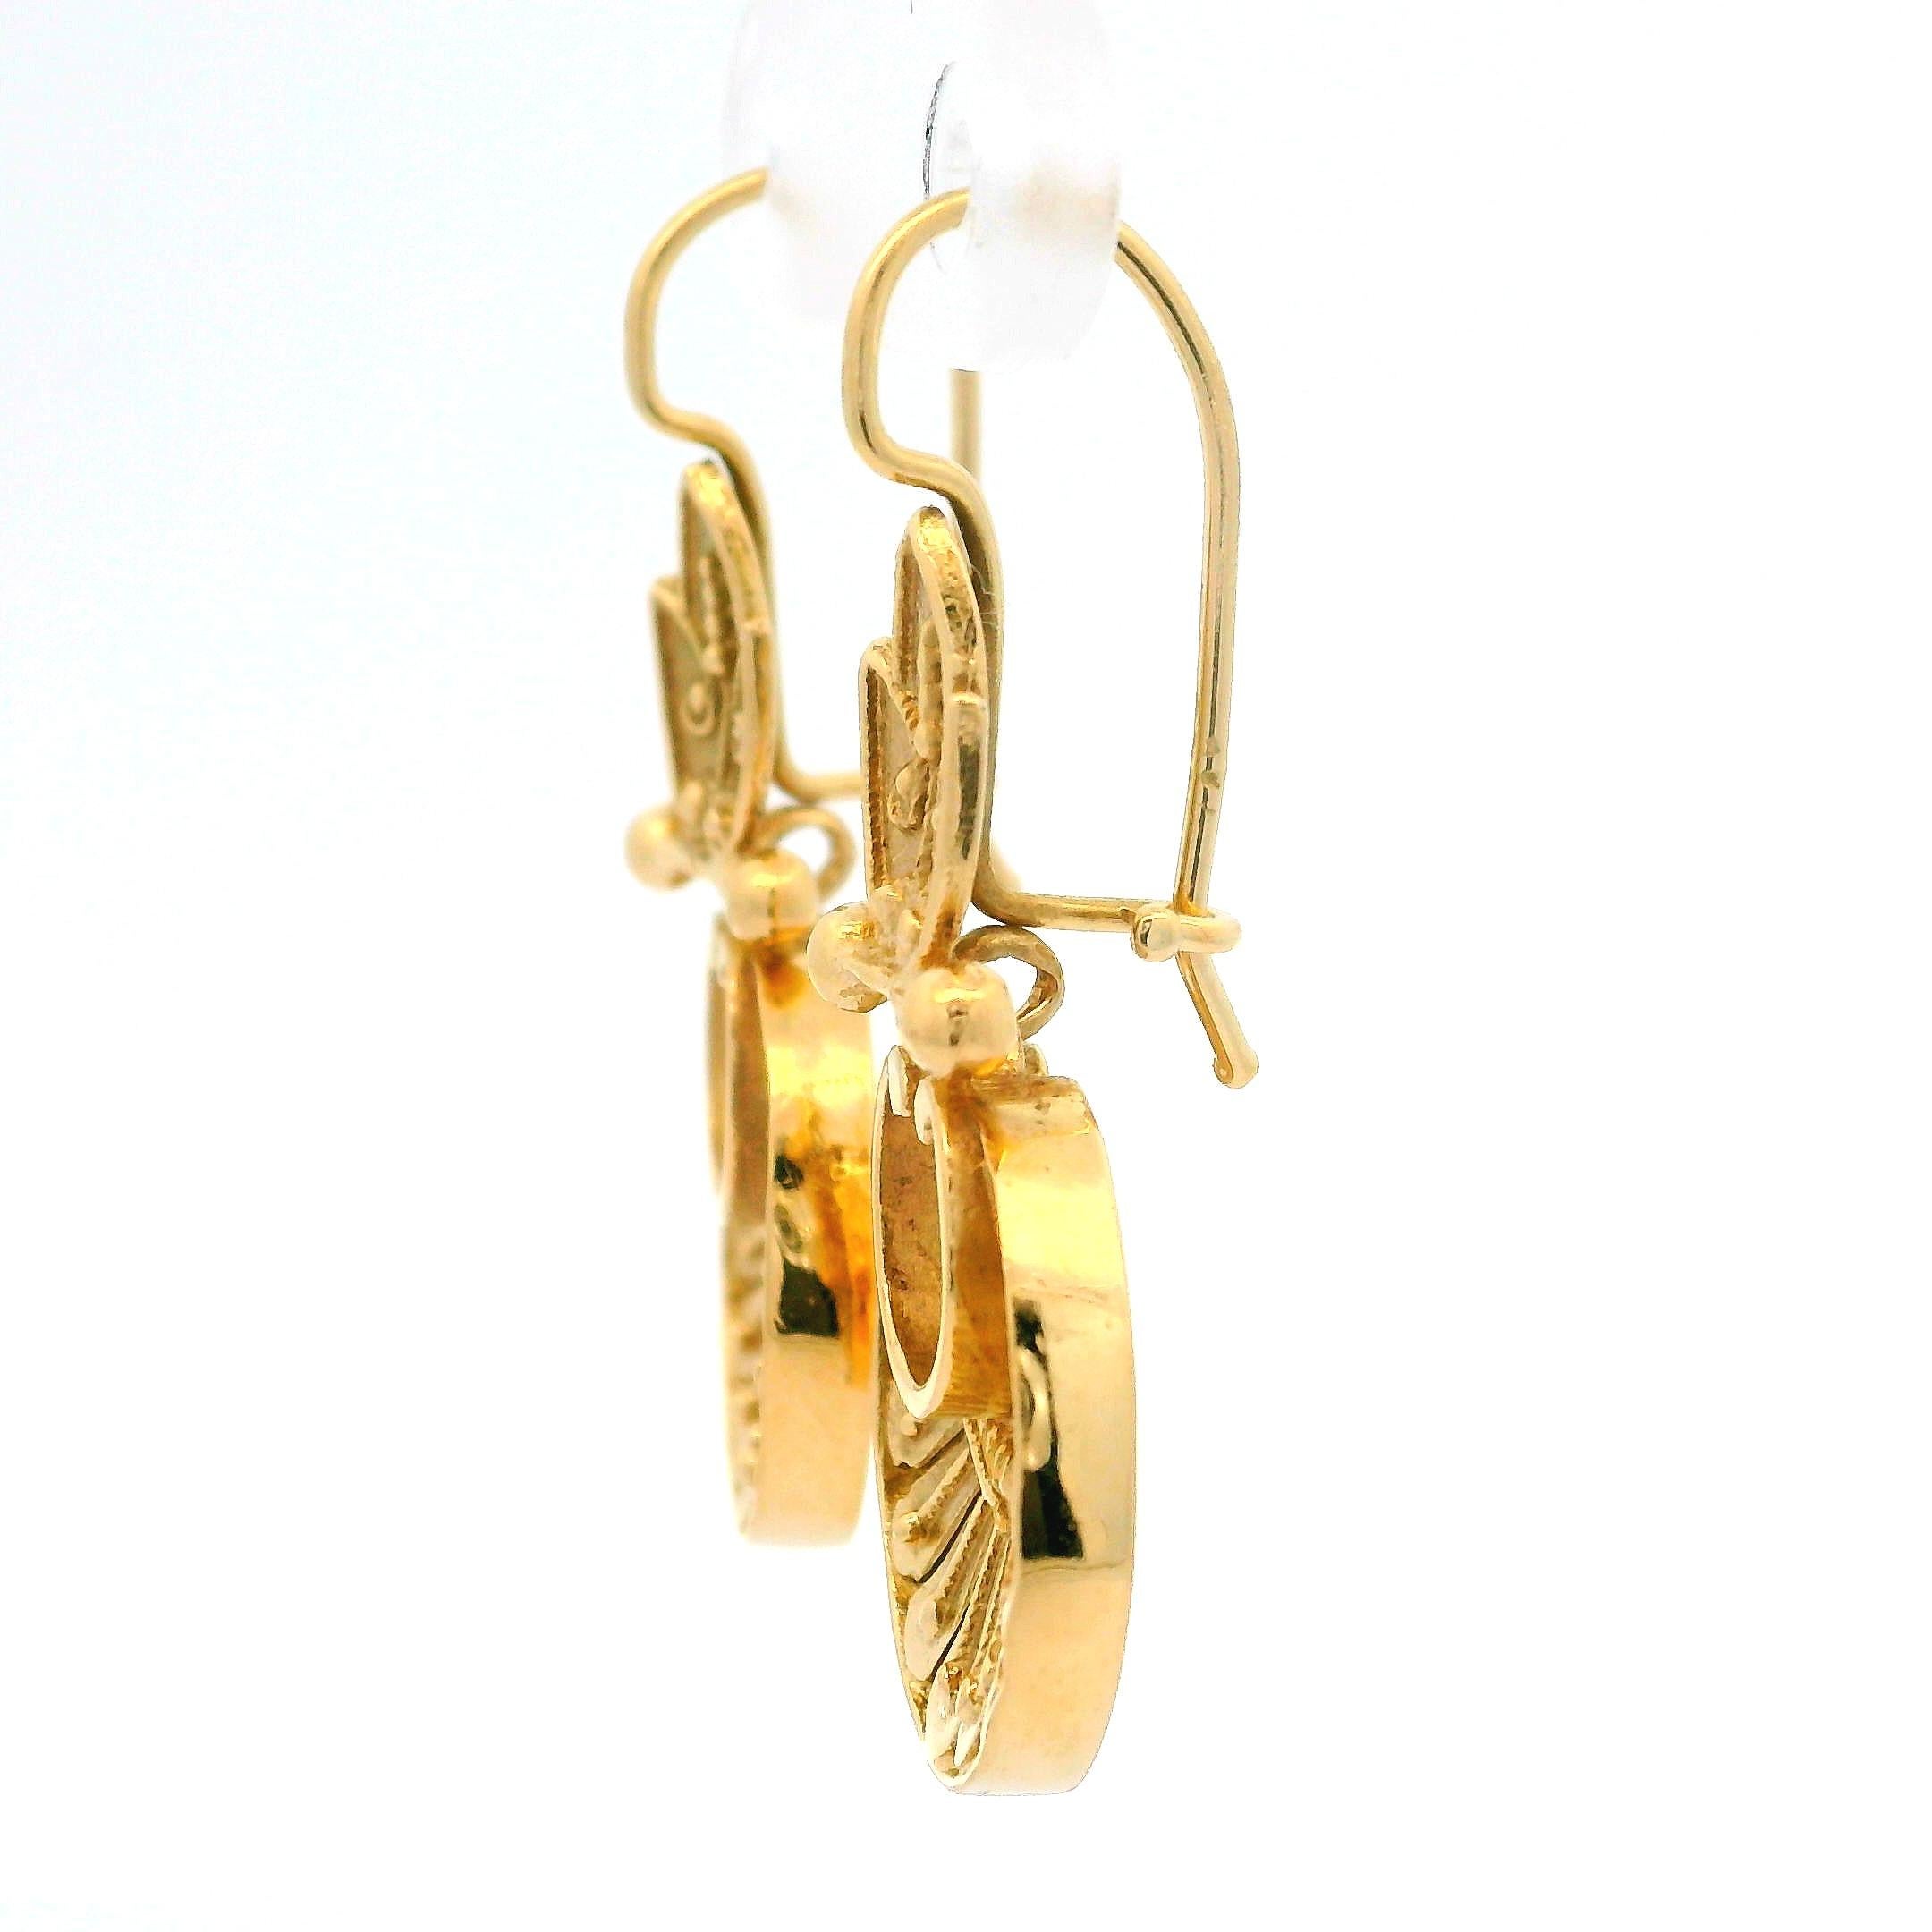 Vintage Etruscan Revival 14k Yellow Gold Ornate Dangle Drop Earrings In Excellent Condition For Sale In Montclair, NJ